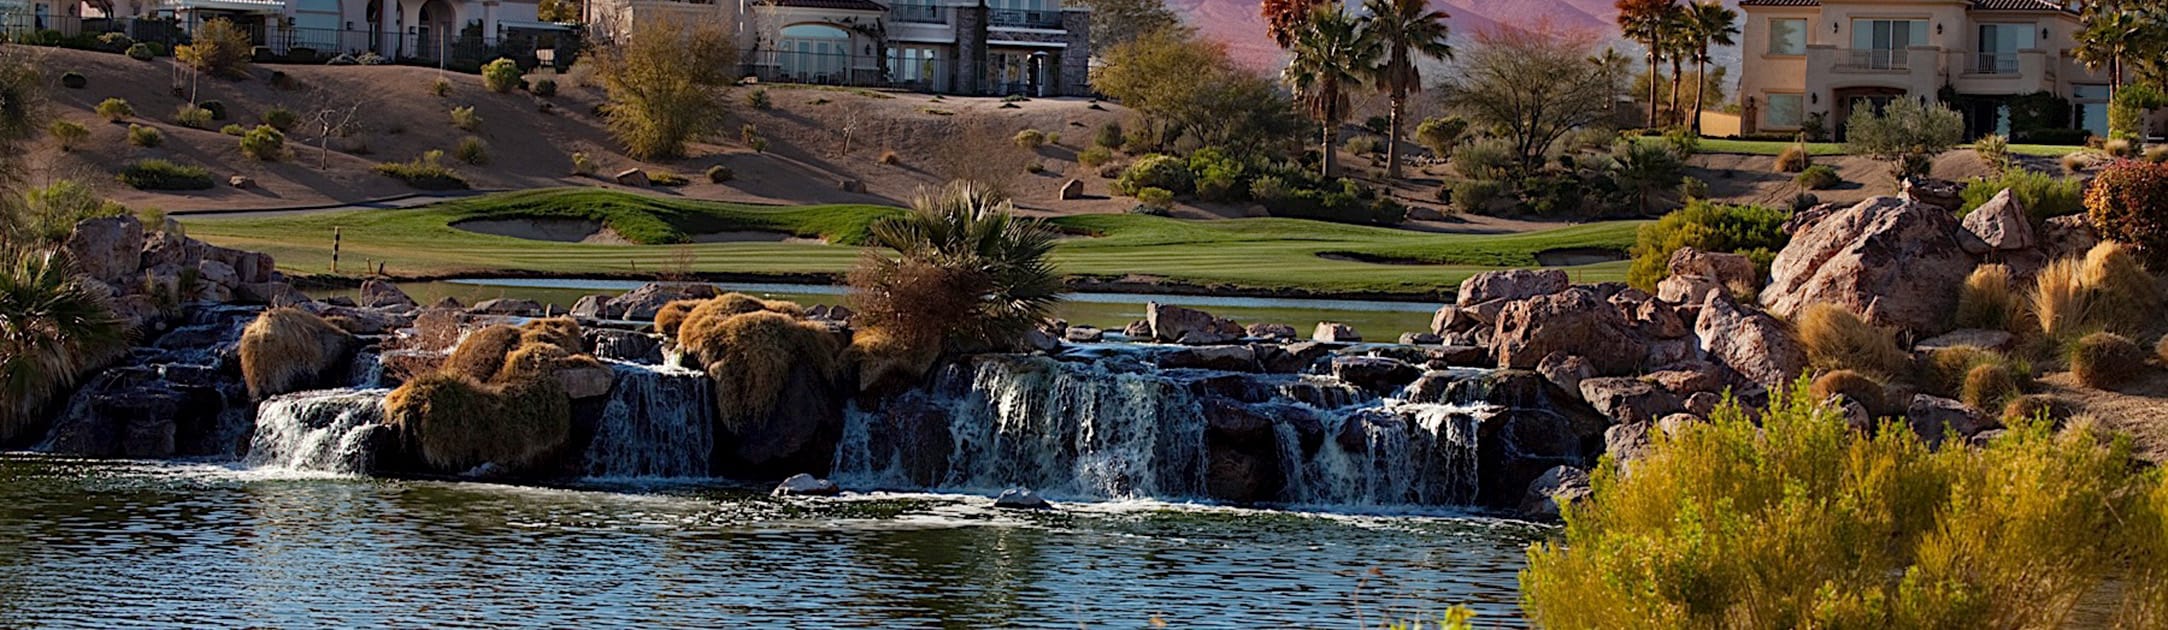 Rock waterfall with golf course, lake, palm trees and homes behind it.